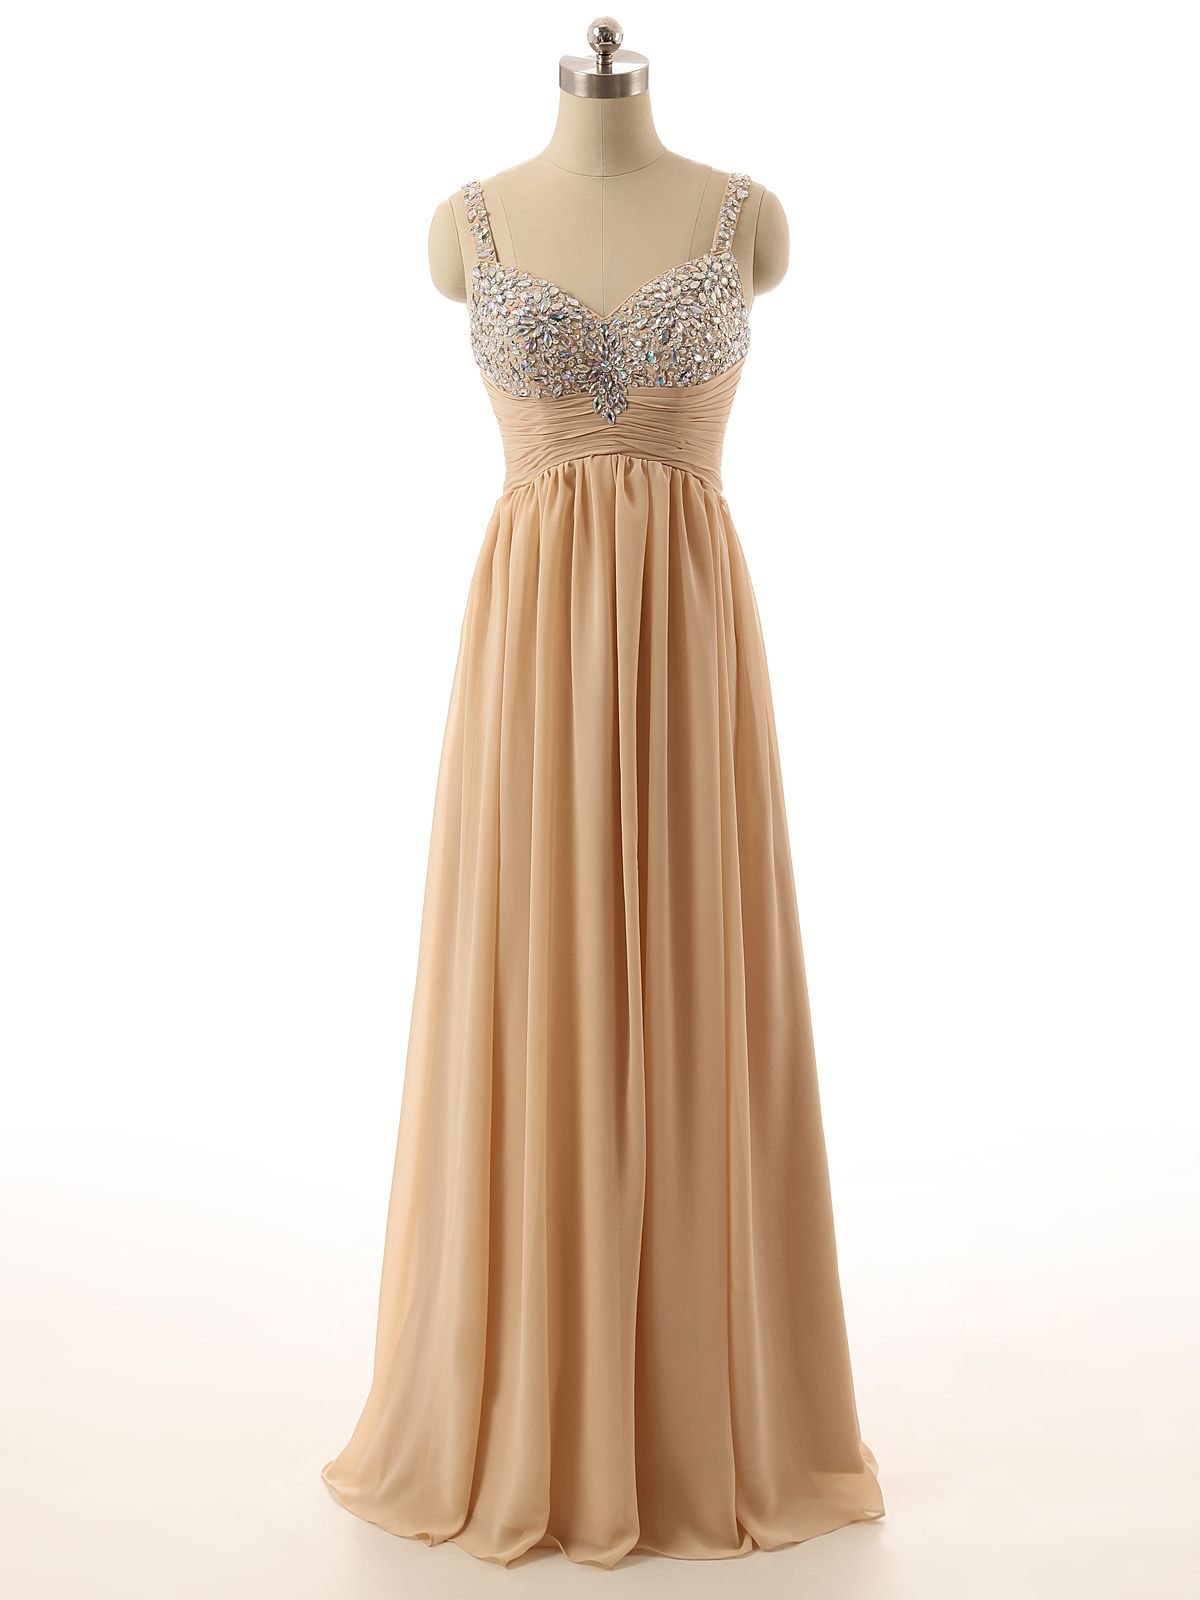 Champagne Crystals Prom Dresses Long Chiffon Evening Gown Spaghetti Party Dress